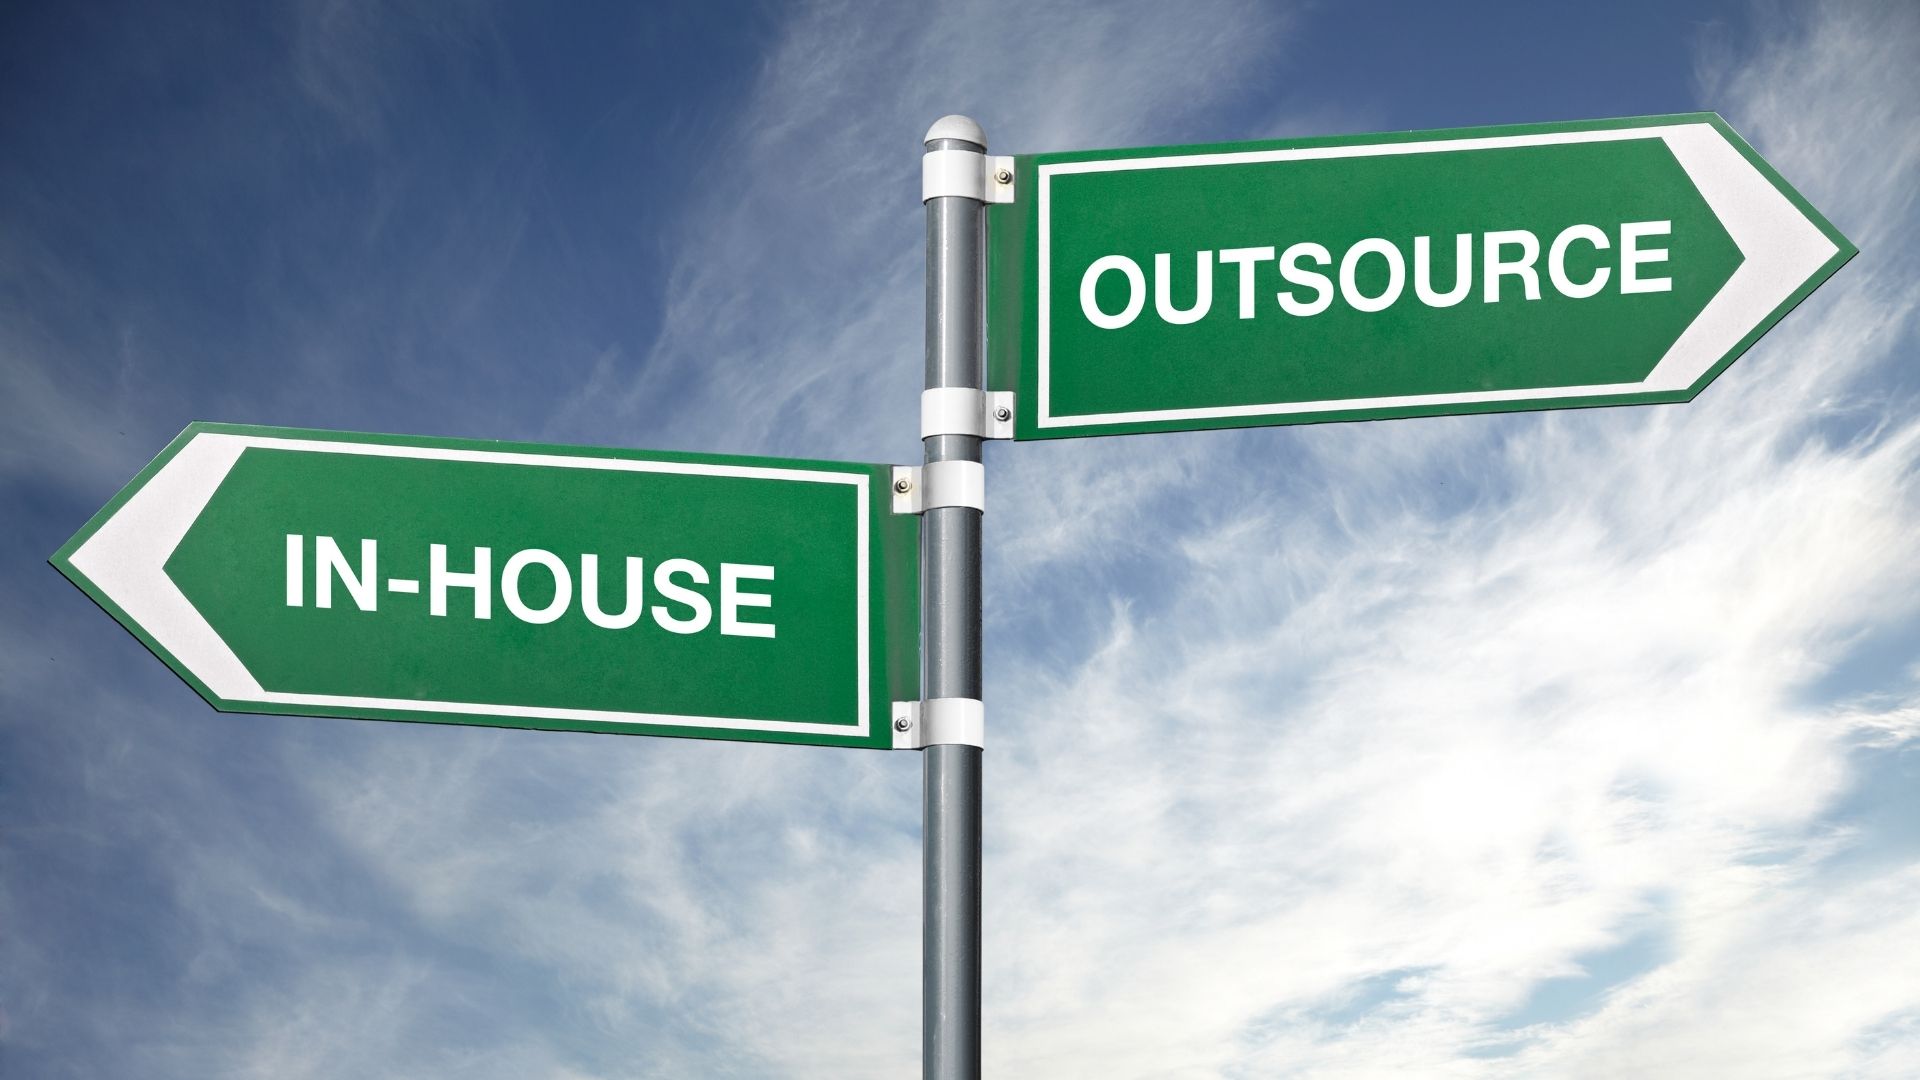 Should I Outsource My Payroll Systems and Processes?